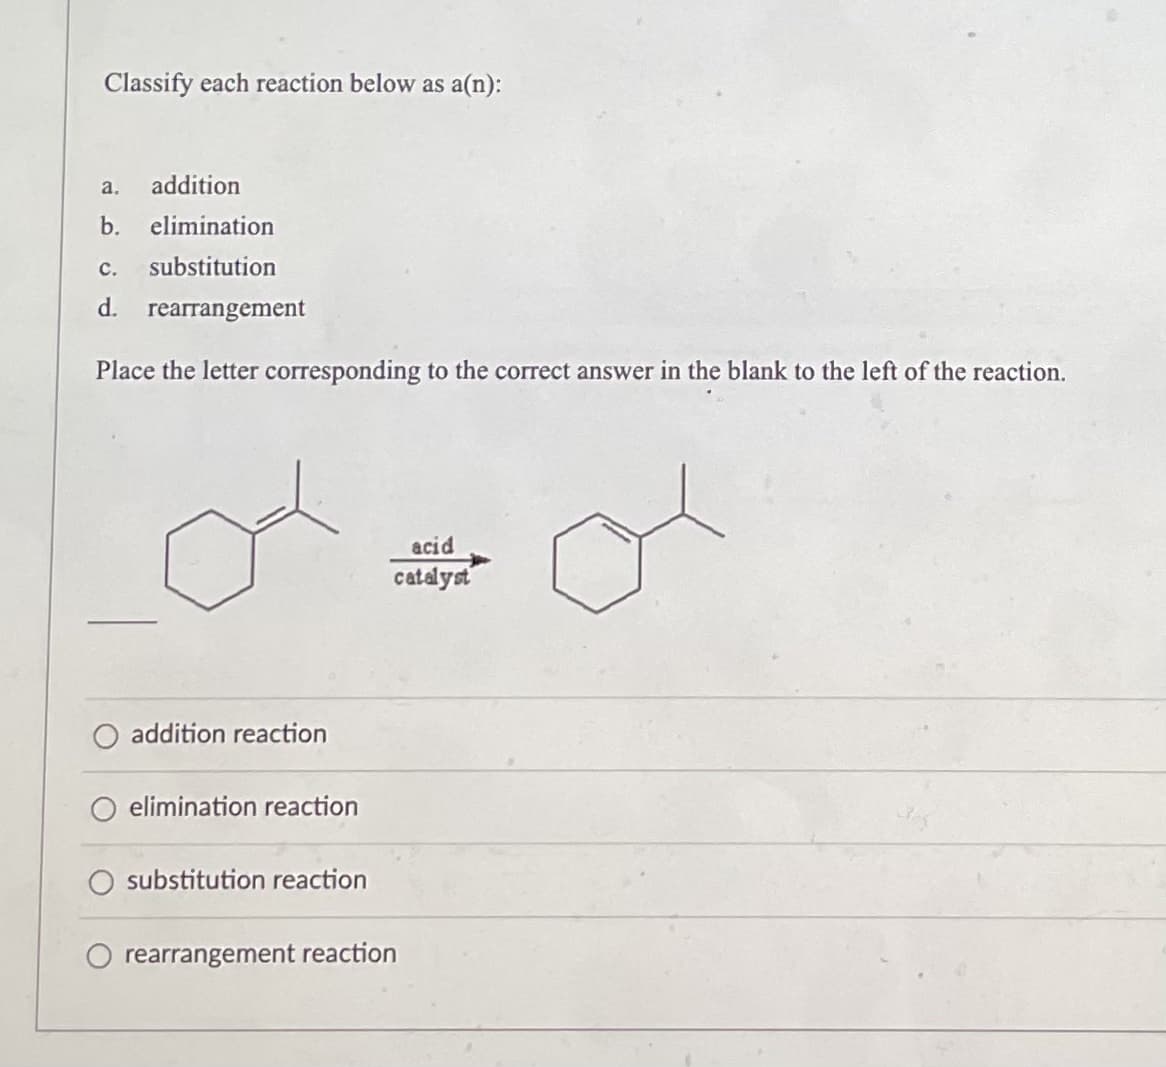 Classify each reaction below as a(n):
a. addition
b. elimination
C. substitution
d. rearrangement
Place the letter corresponding to the correct answer in the blank to the left of the reaction.
or
acid
catalyst
addition reaction
elimination reaction
O substitution reaction
rearrangement reaction